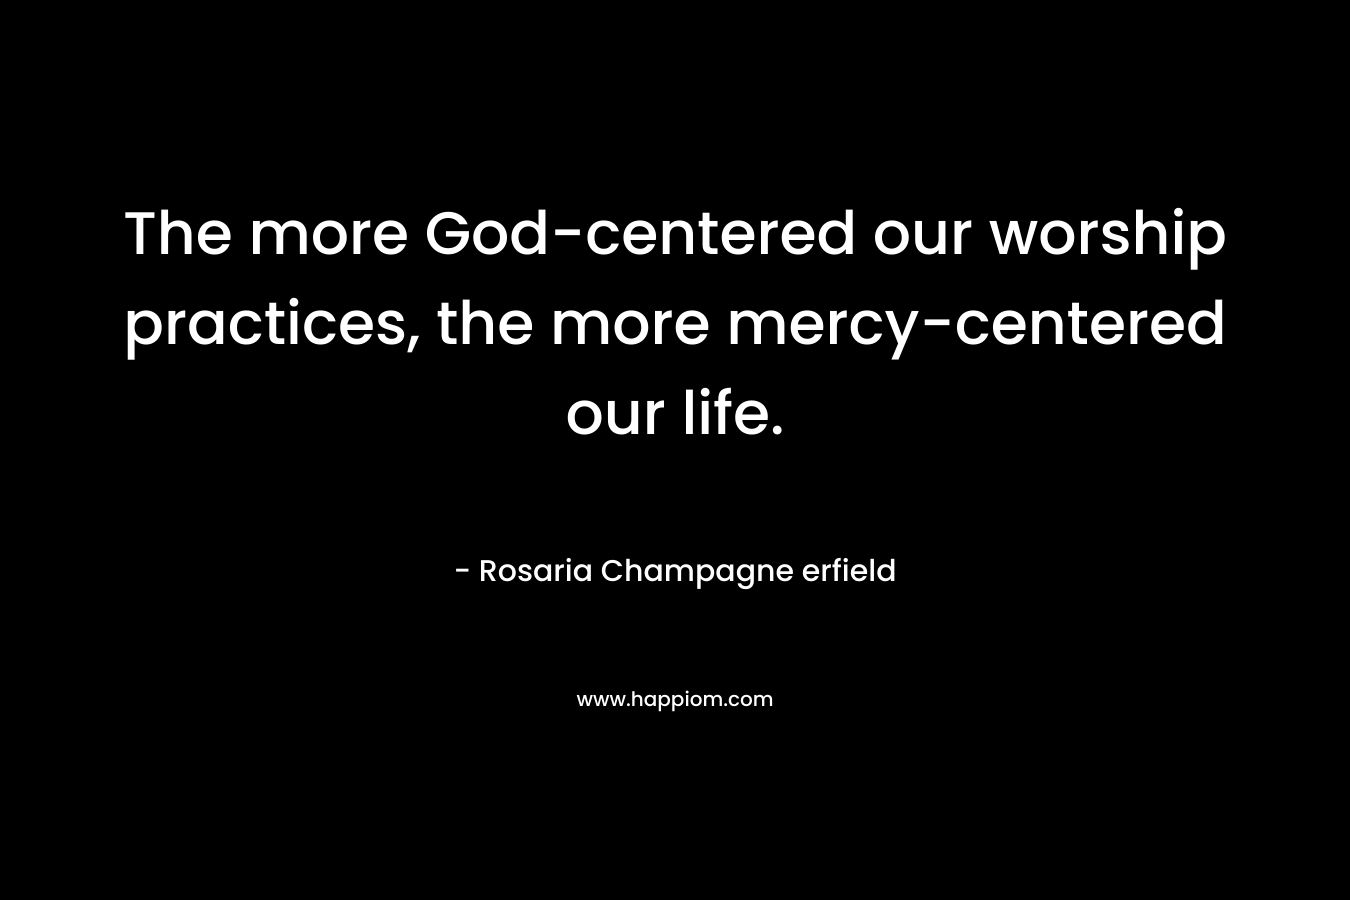 The more God-centered our worship practices, the more mercy-centered our life. – Rosaria Champagne erfield